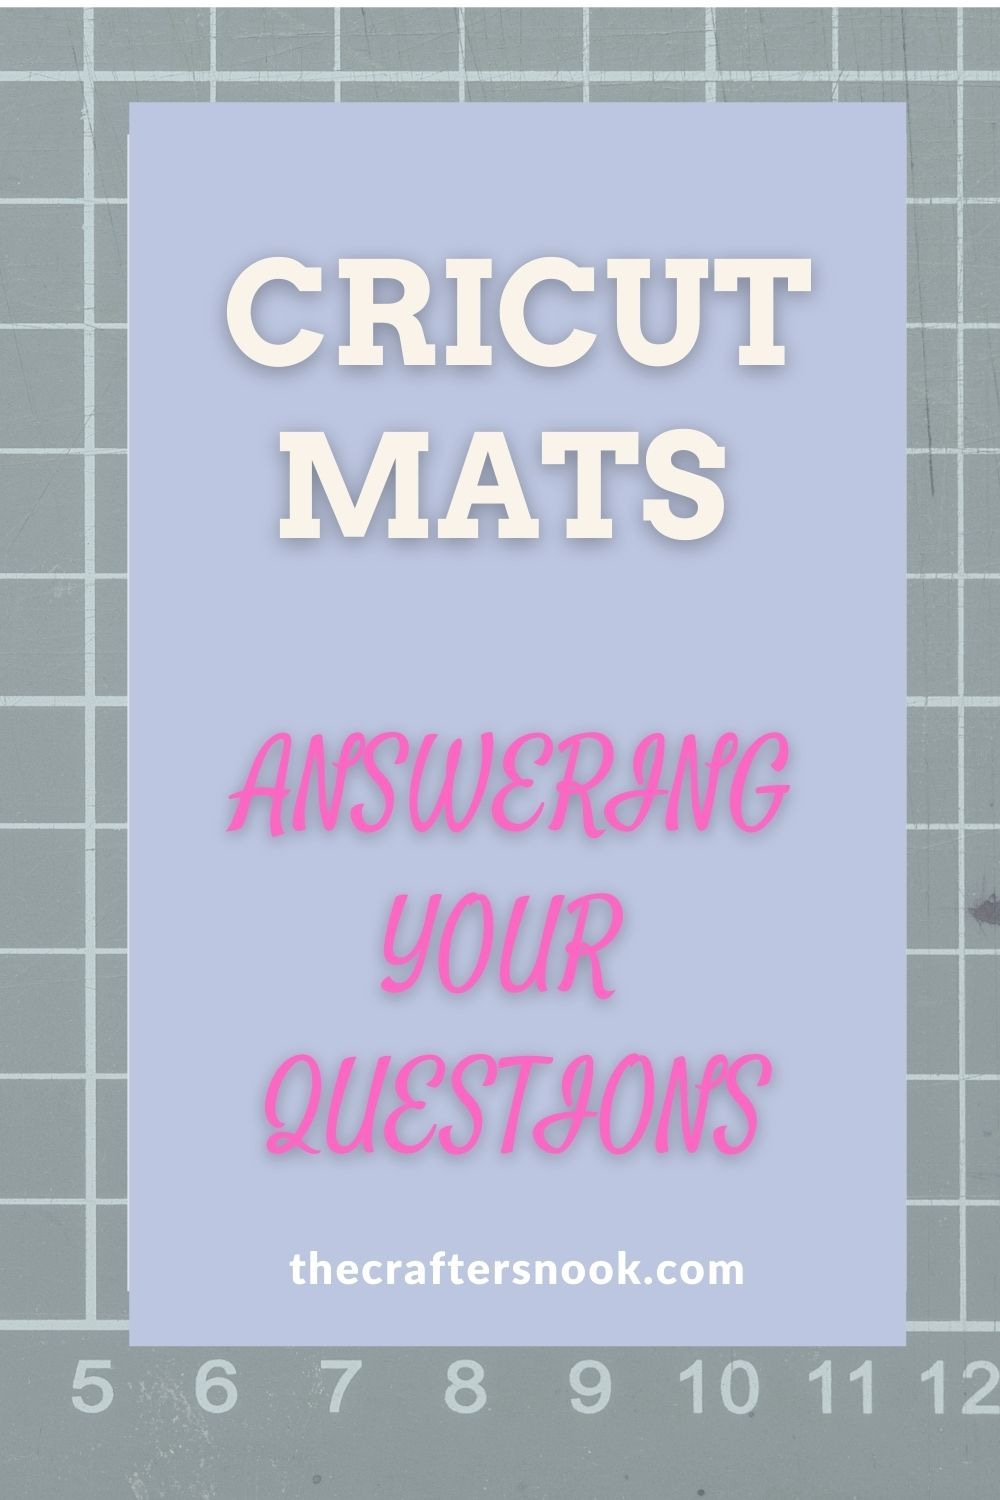 Cricut Mats - Answering Your Questions - The Crafters' Nook